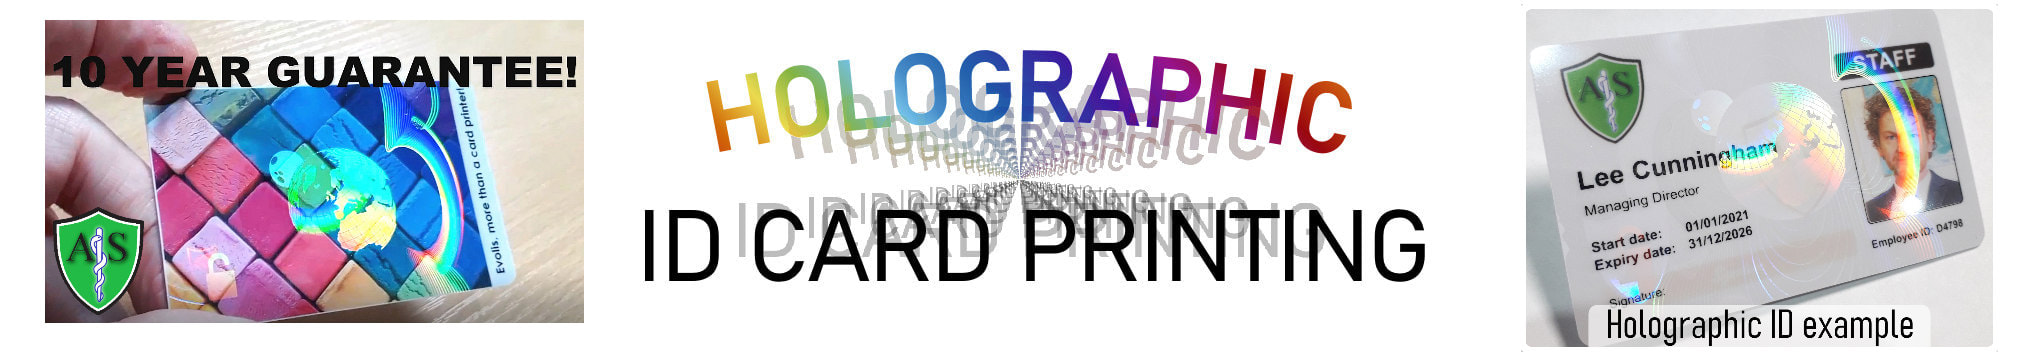 Warrington holographic ID card print service. Employee Identity cards with hologram or holograph security mark.